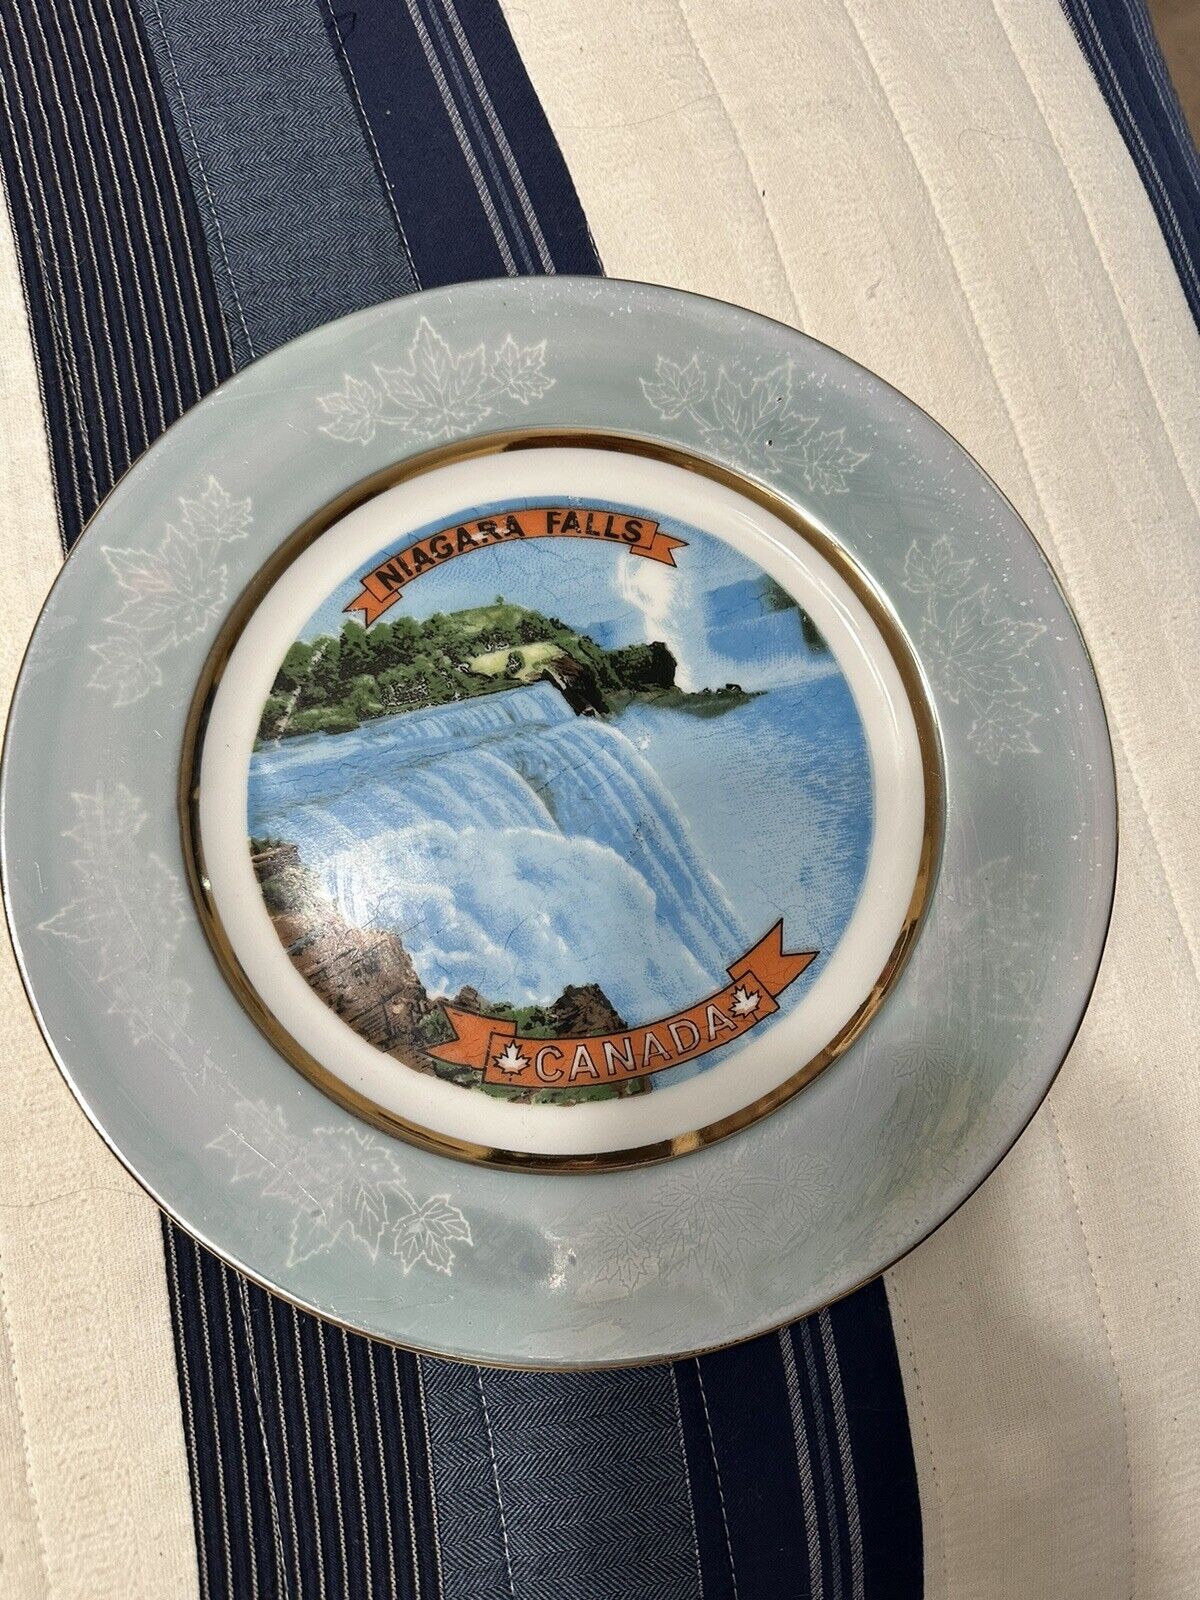 Vintage Imported By Giftcraft Niagara Falls Canada Decorative Plate Souvenir Art